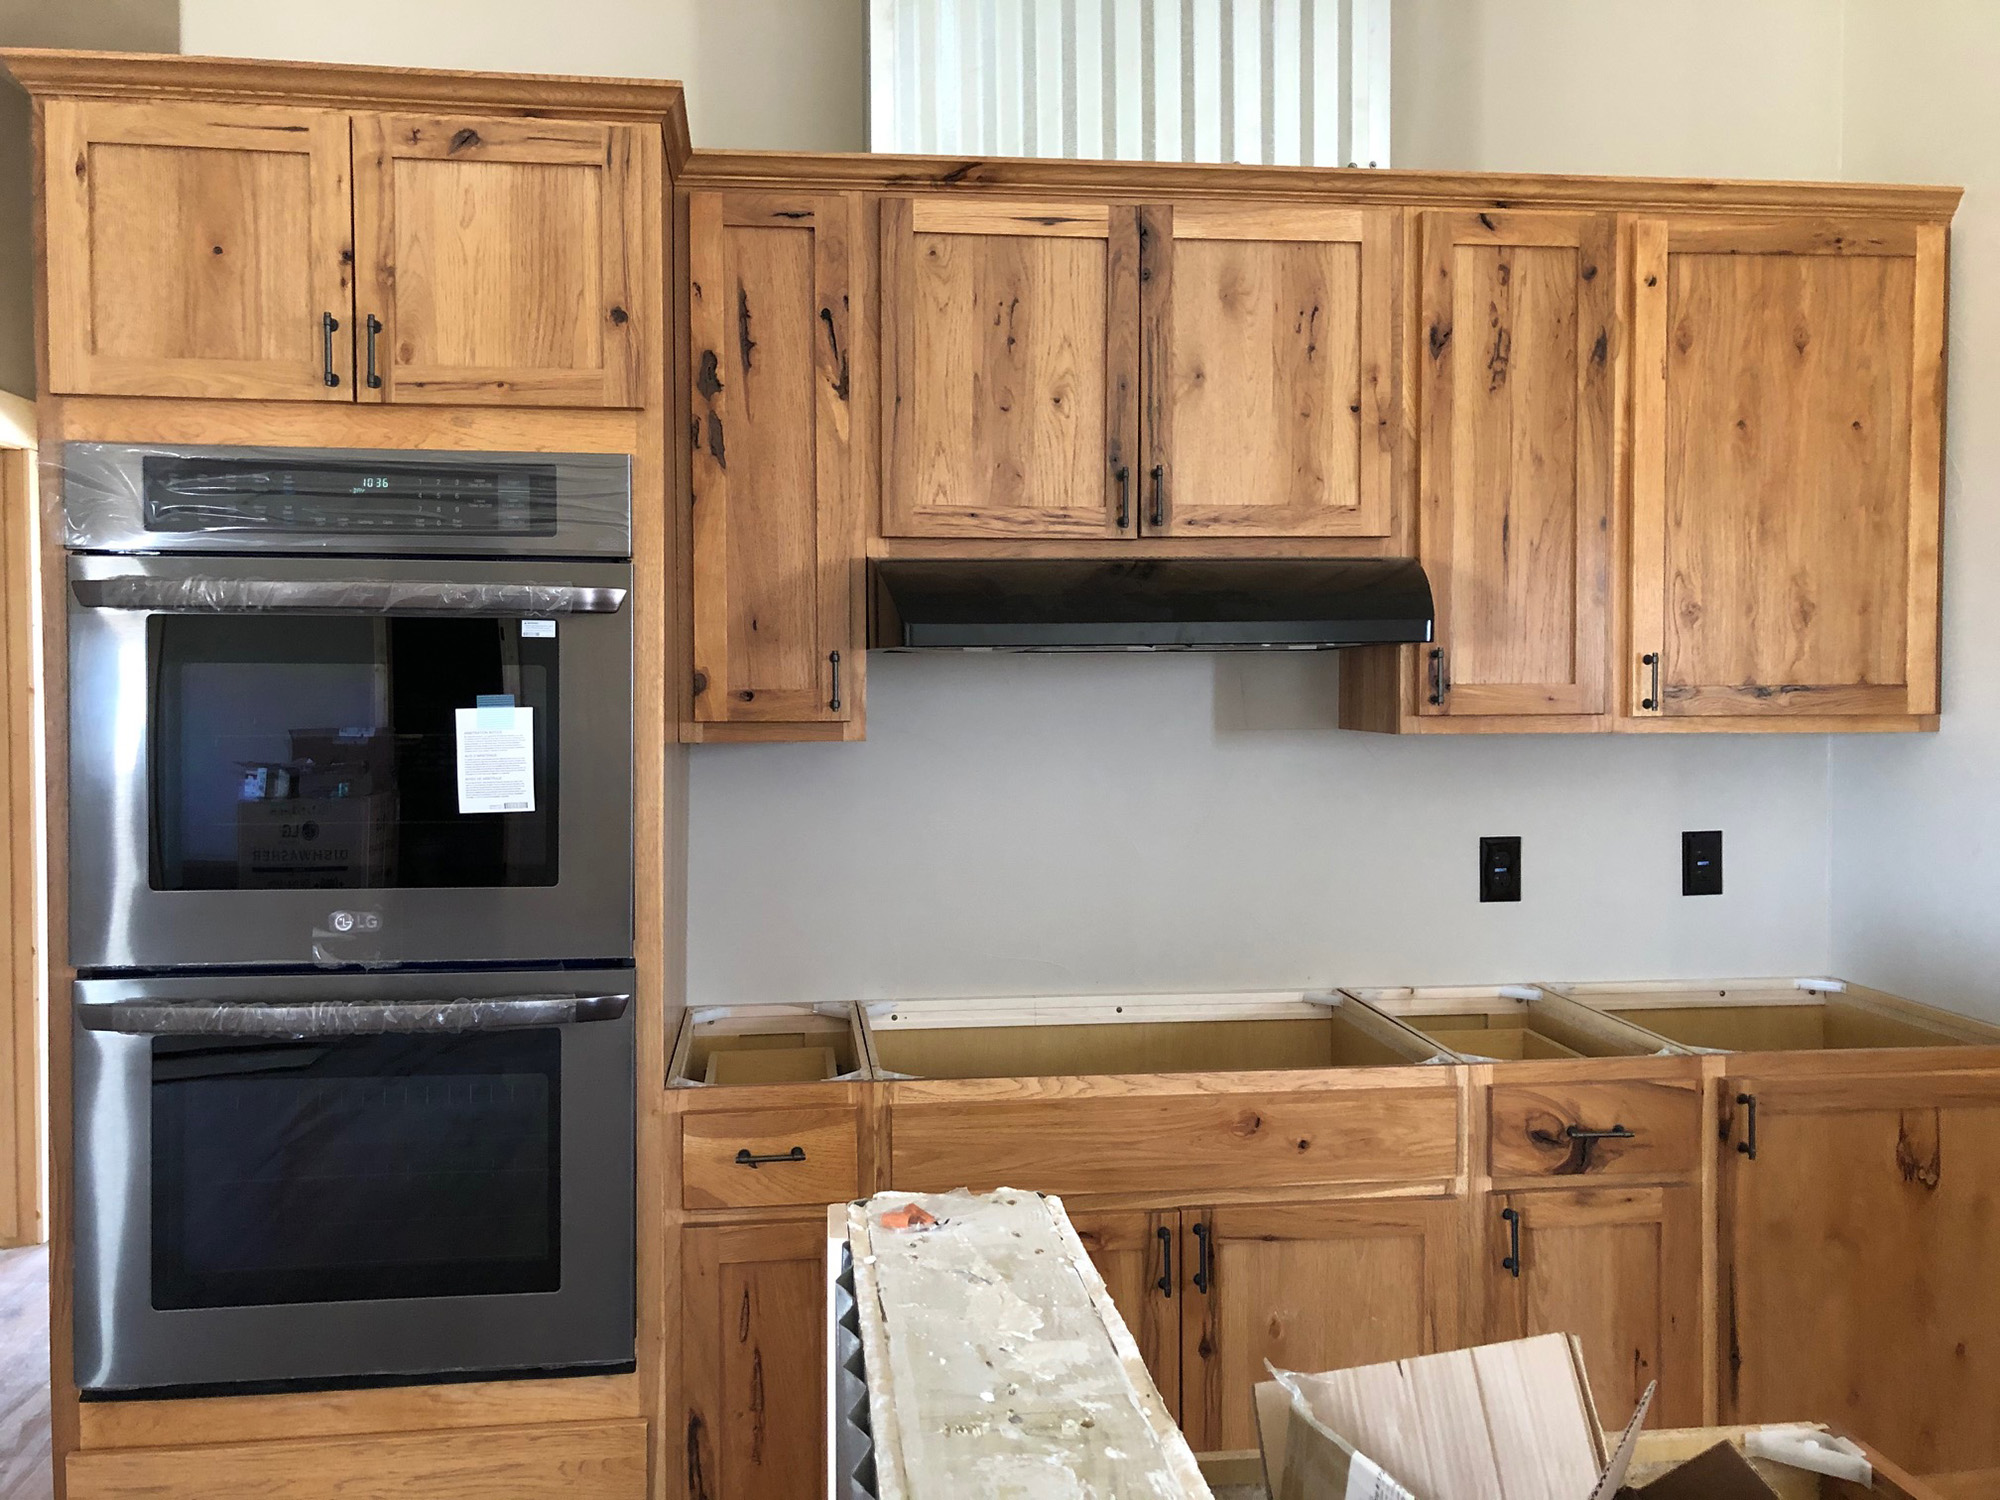 Fat Puppy's barndominium featured project showing cabinets and oven